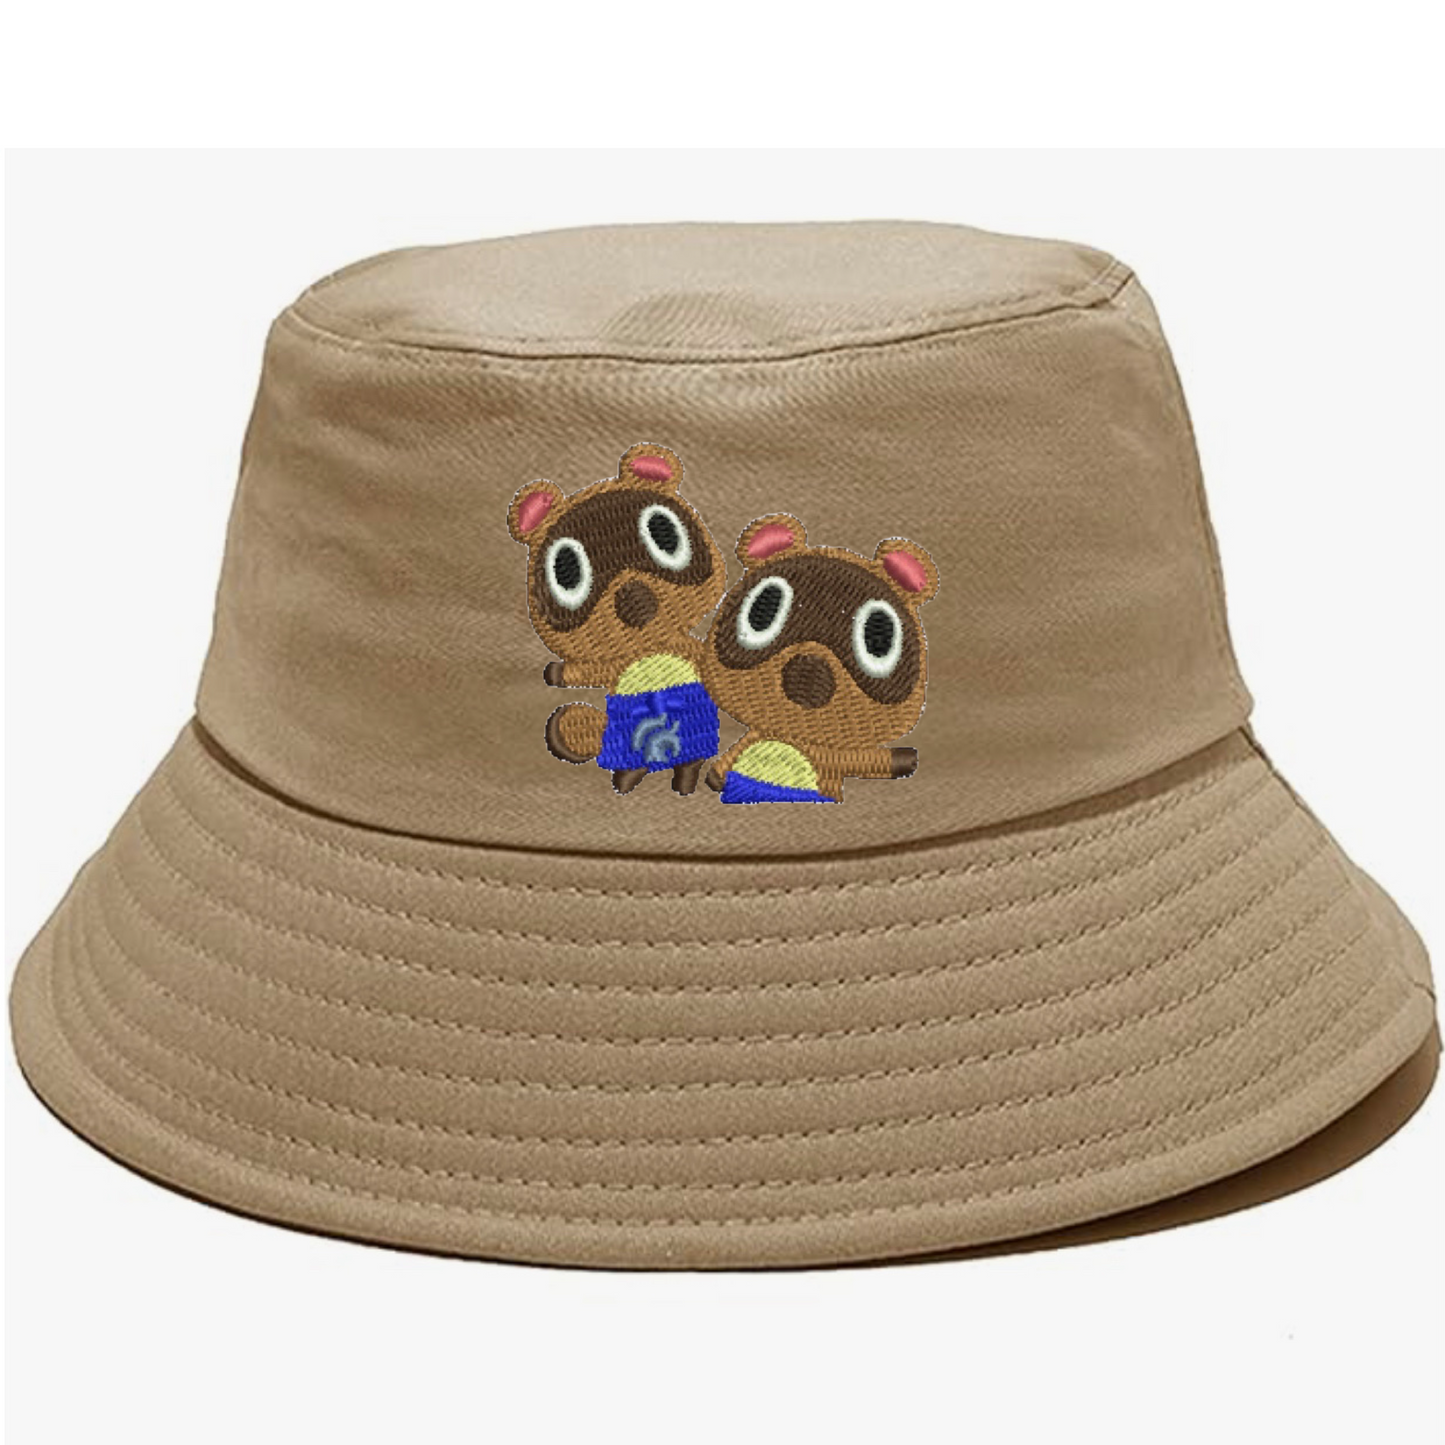 PERSONALIZED~ Animal crossing villager ~ Bucket Hats